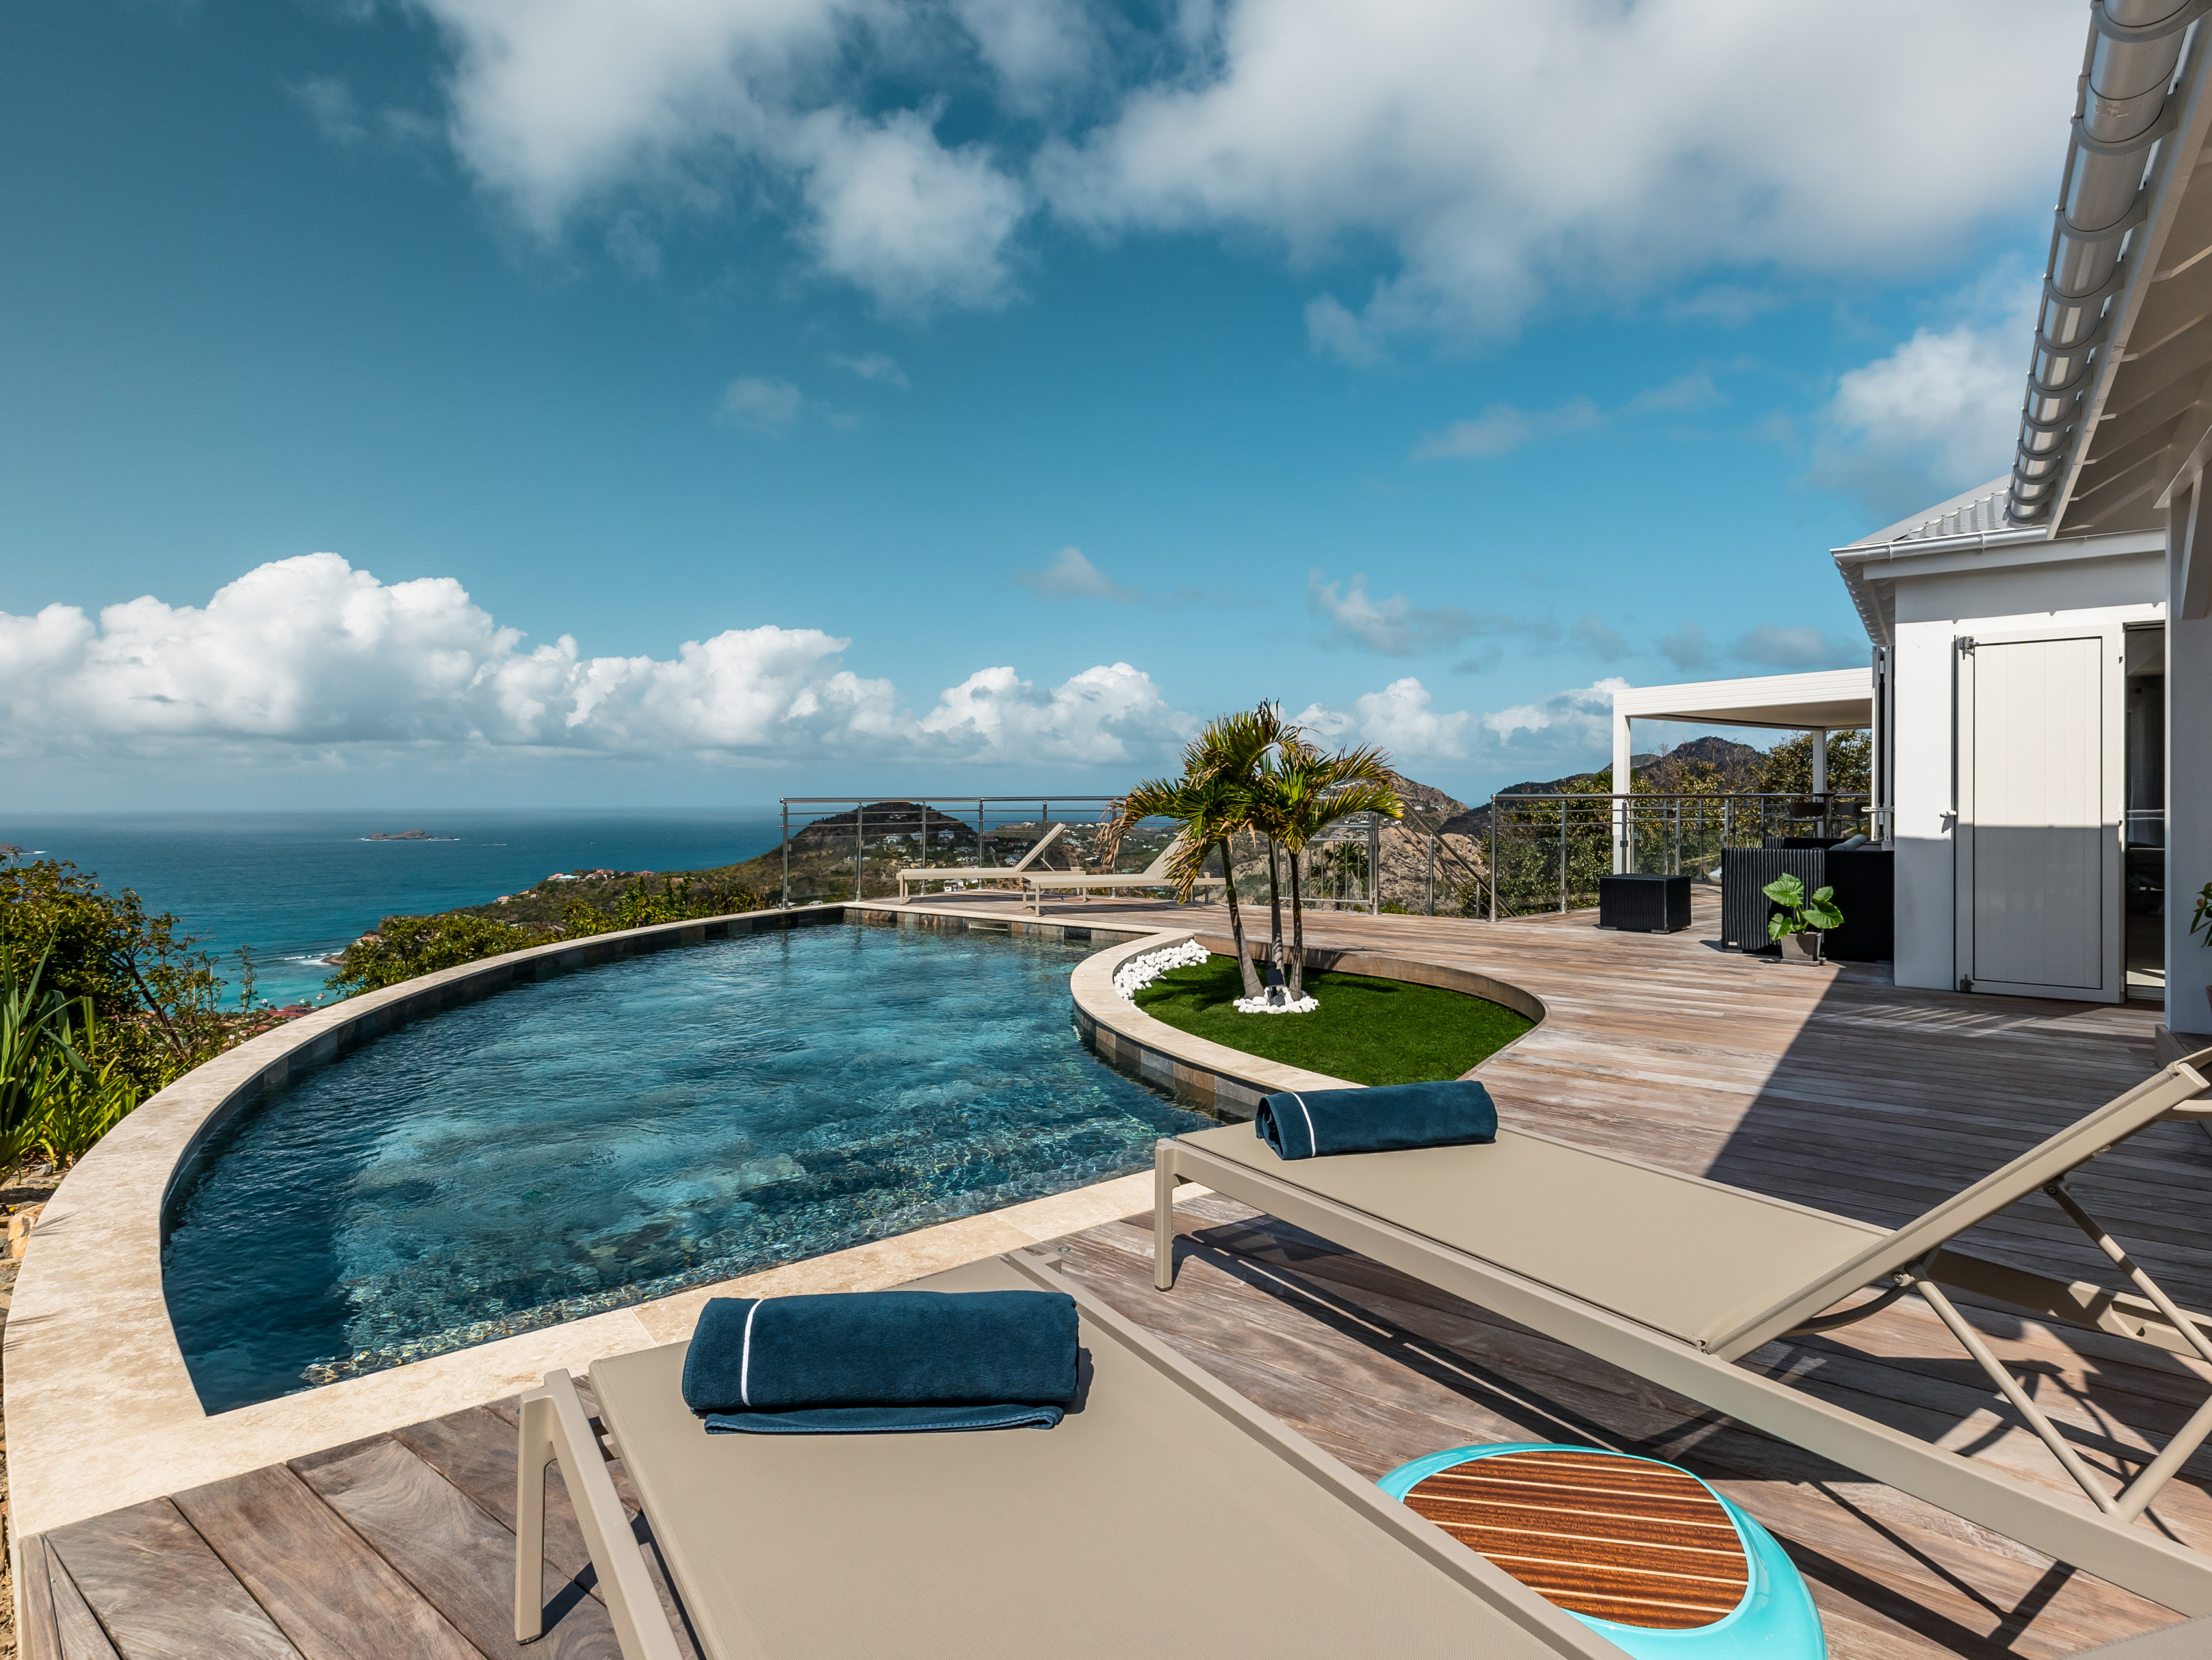 Villa Marris - Vacation rentals with private pools in Lurin St Barts